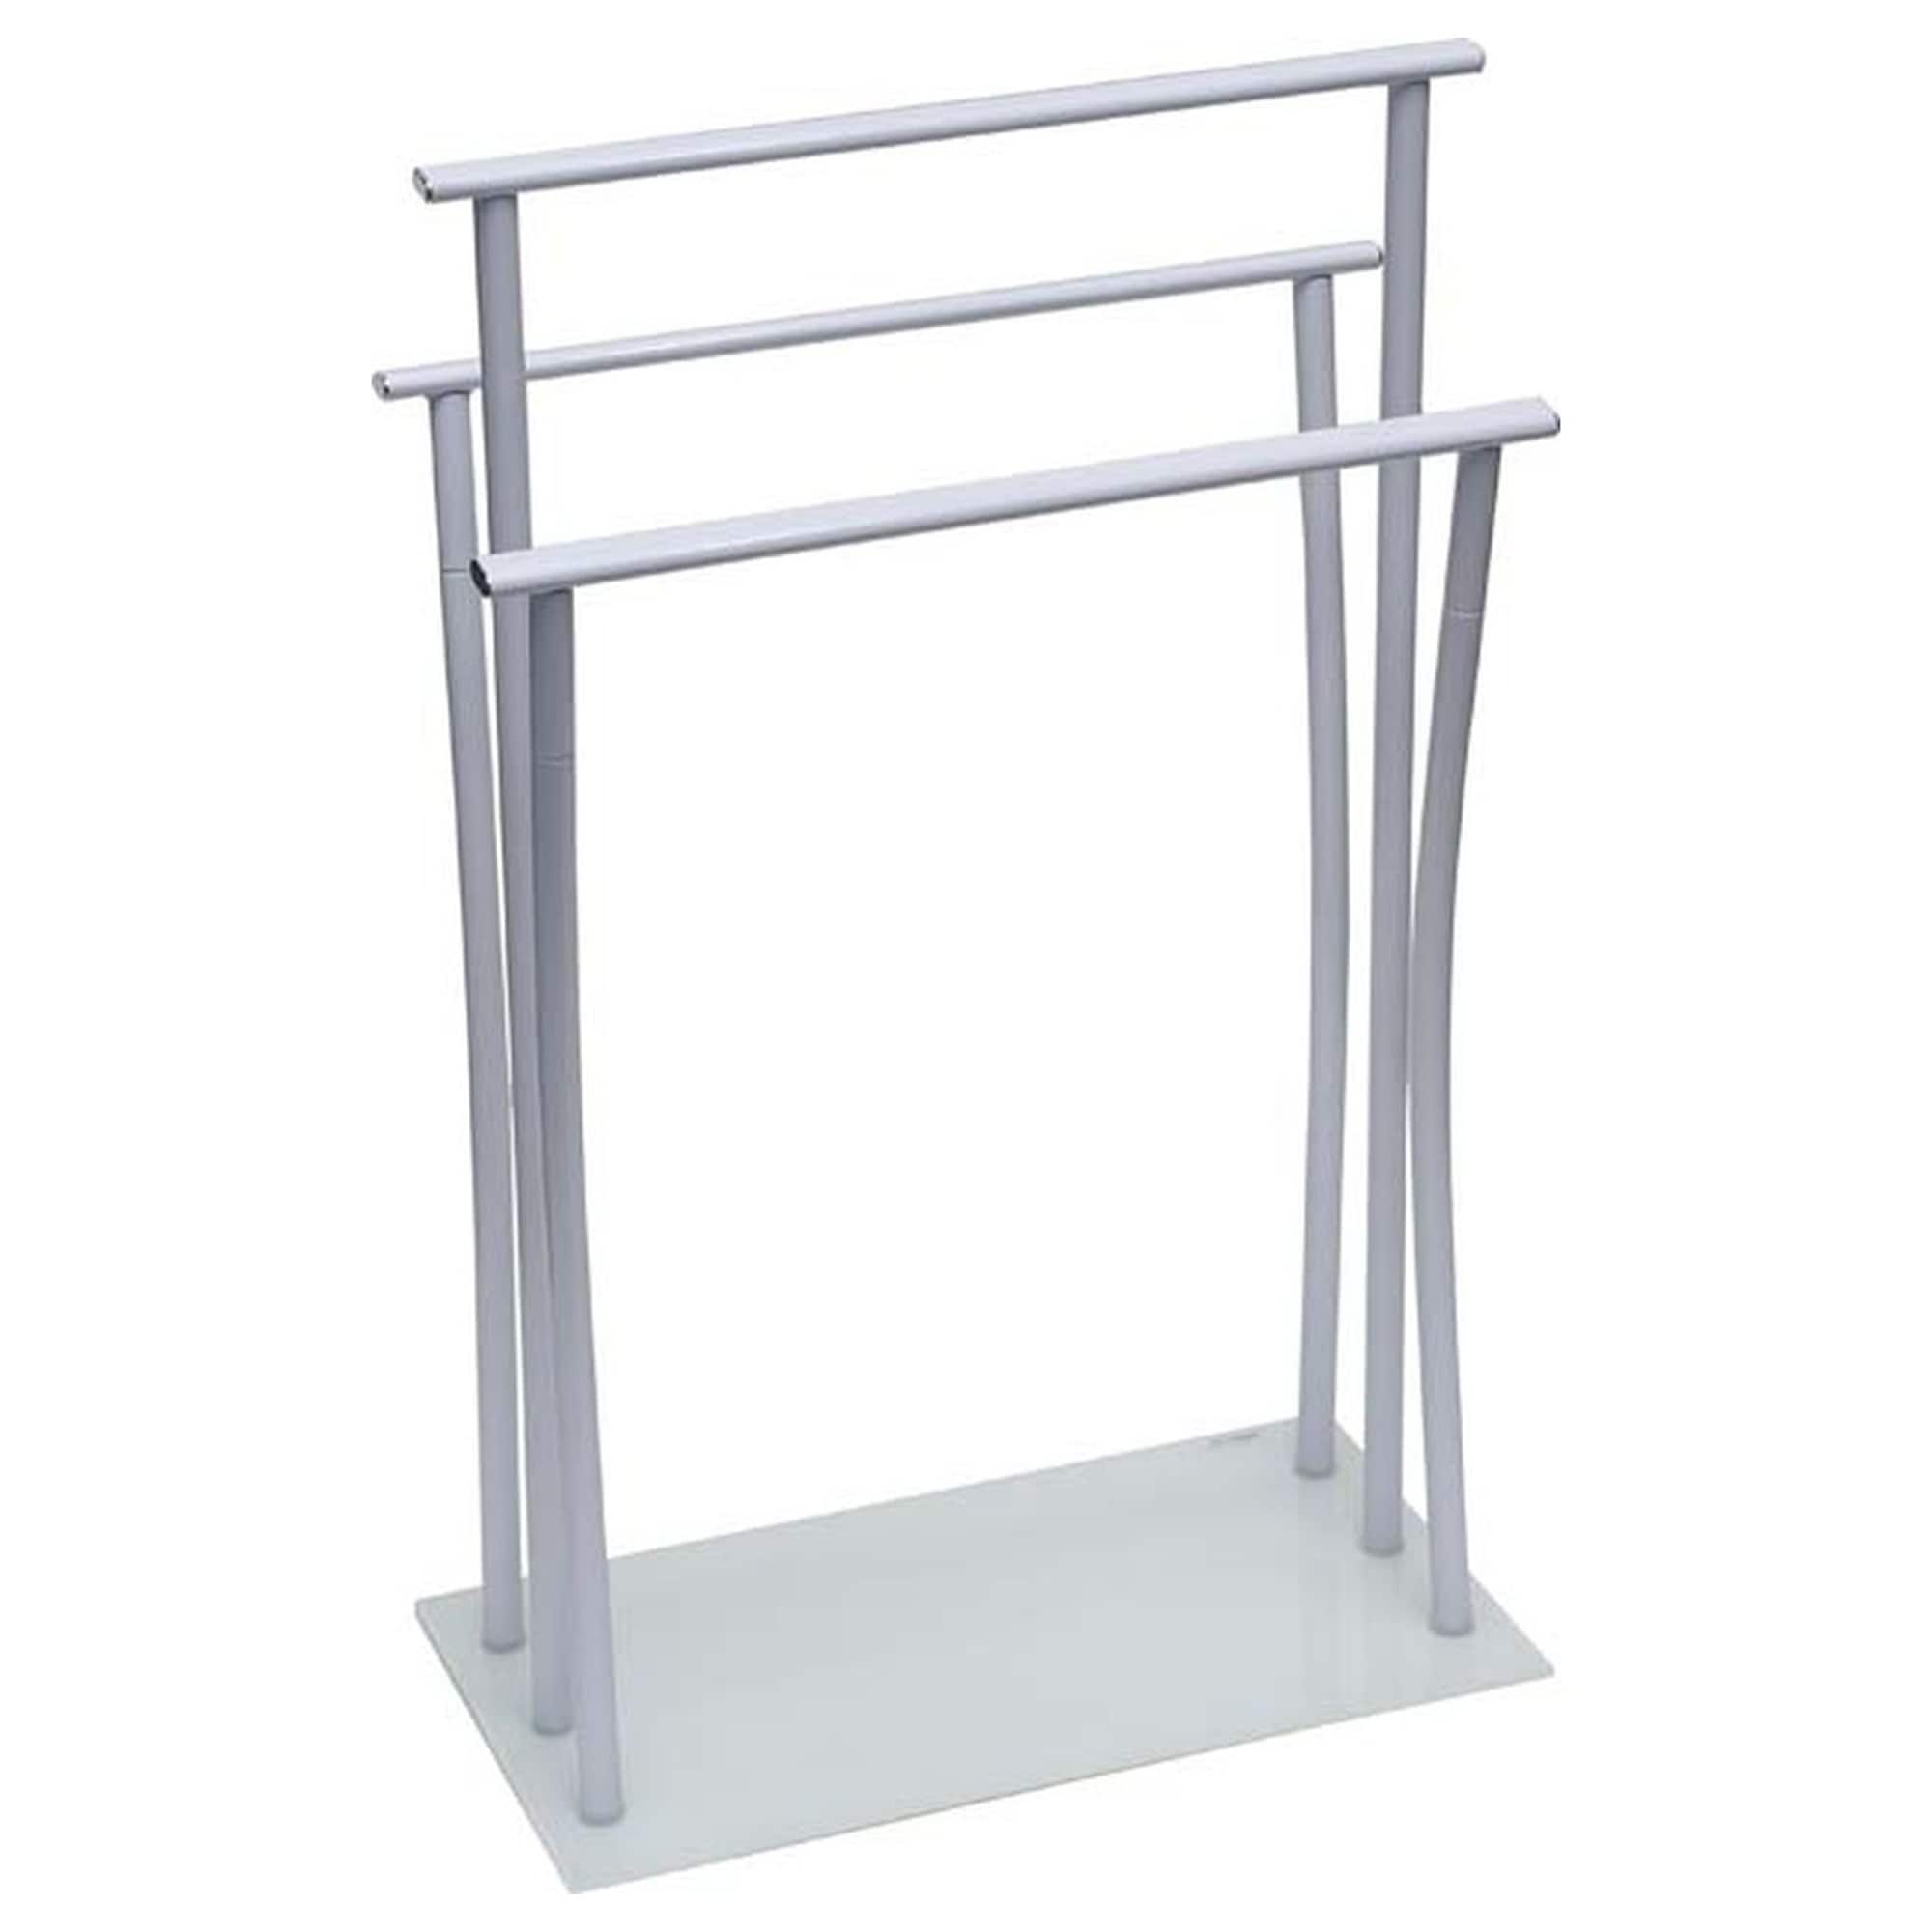 https://ak1.ostkcdn.com/images/products/is/images/direct/0b1709c401b1d093a7056fbdd7f7a6994d8e18c9/Freestanding-Towel-Rack-Three-Bars-Tempered-White-Glass-Base.jpg